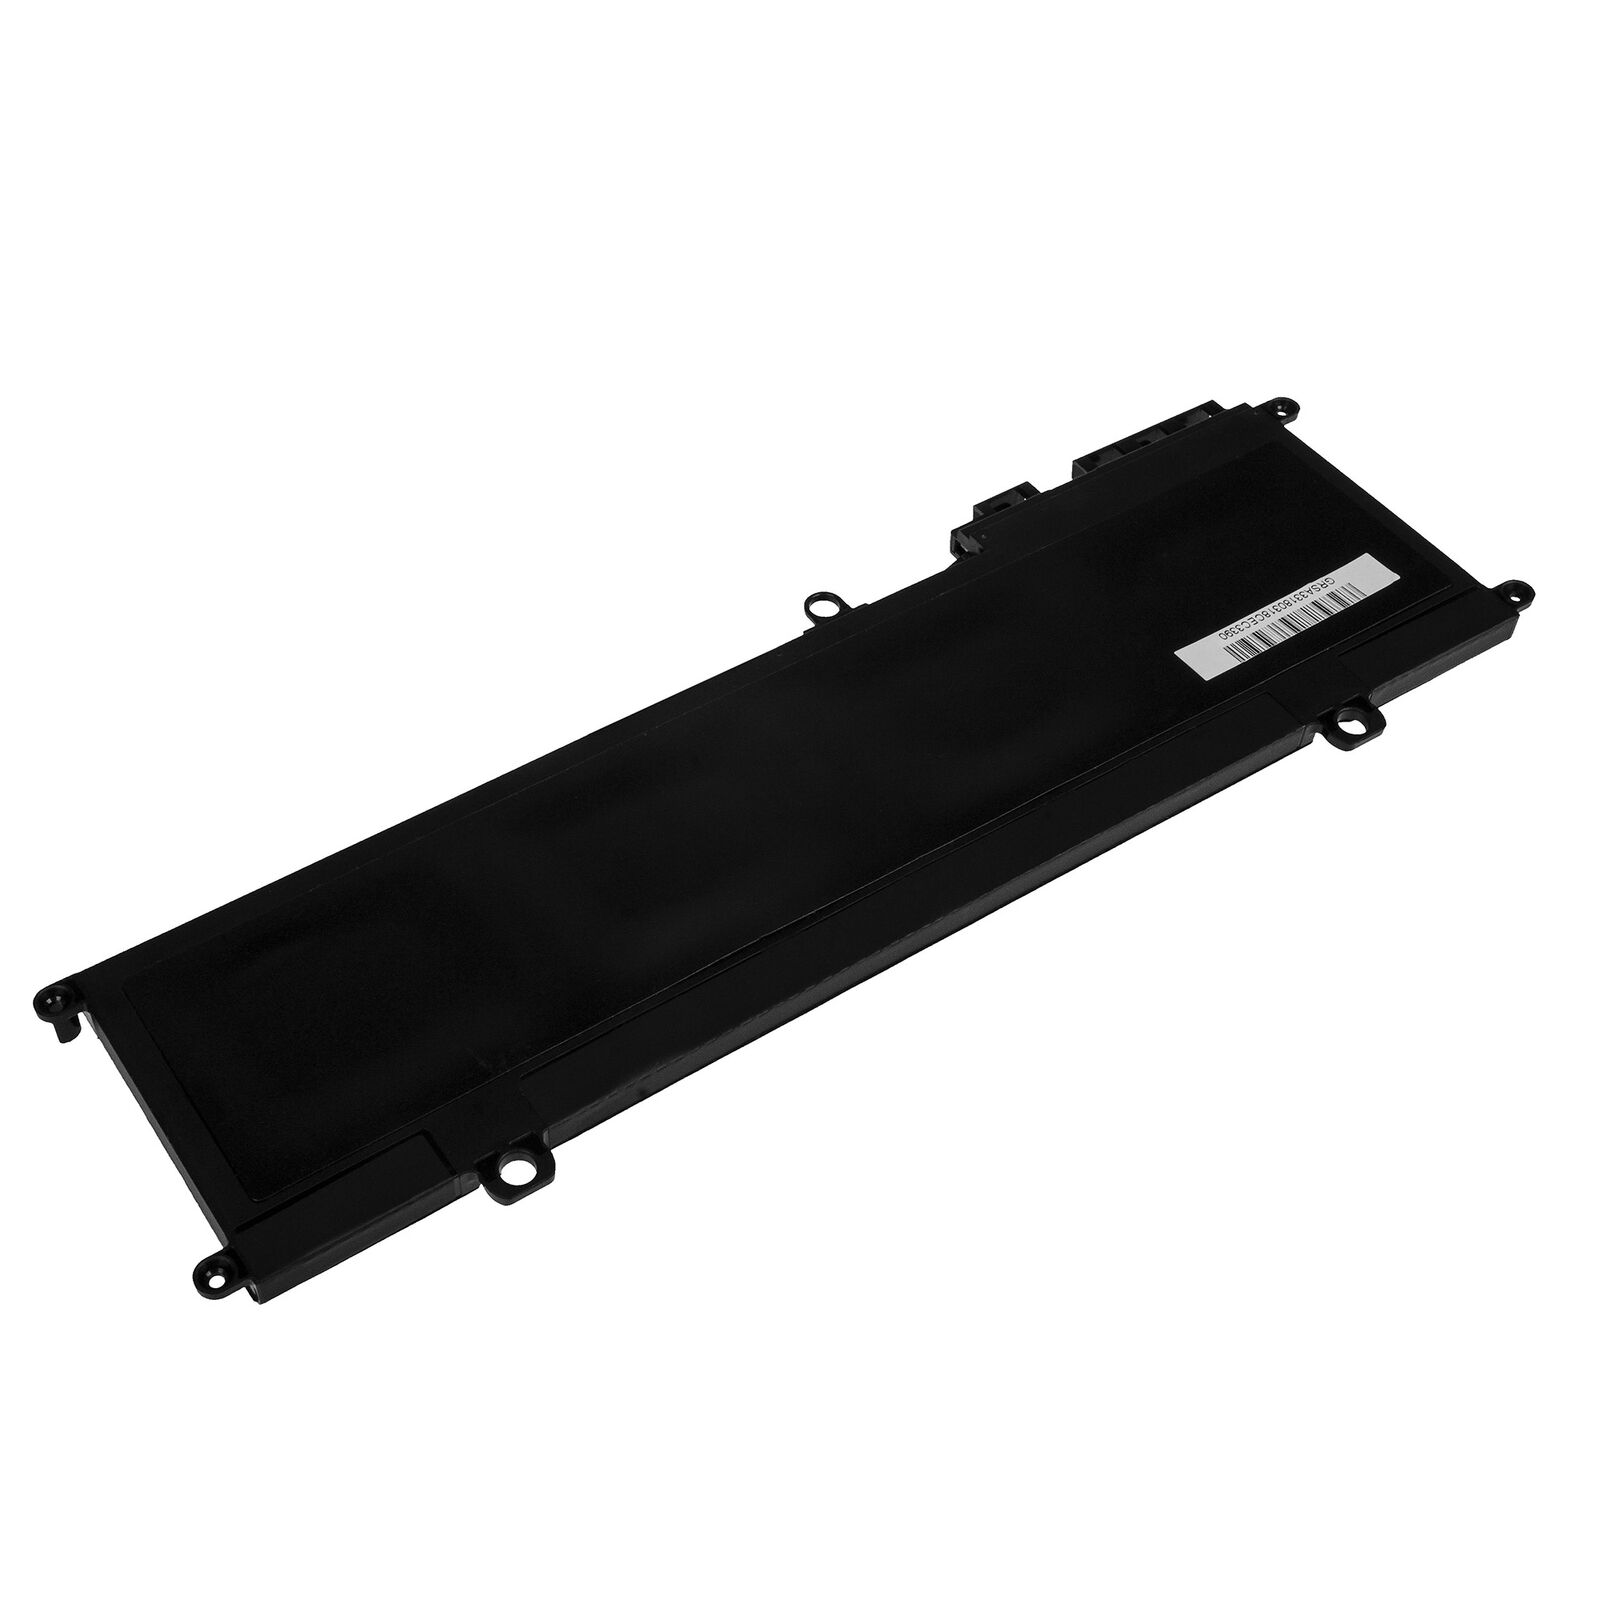 AA-PLVN8NP SAMSUNG NP770Z5E NP880Z5E NP870Z5E NP870Z5G ATIV8 compatible battery